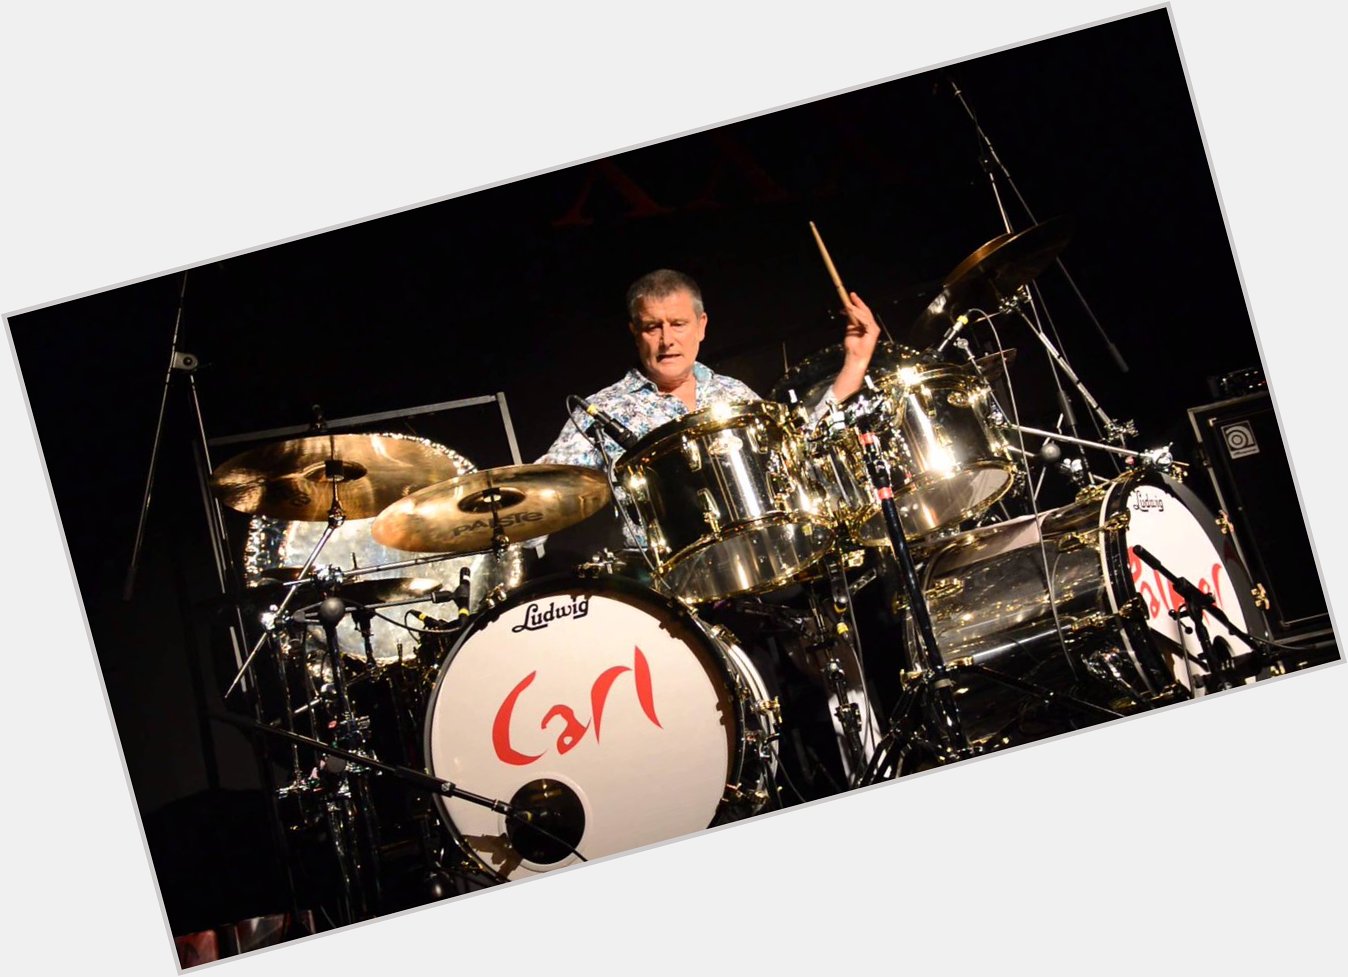 Born on this day in 1950 in Handsworth, UK, Carl Palmer, drummer of ELP and Asia. Happy 67th birthday 